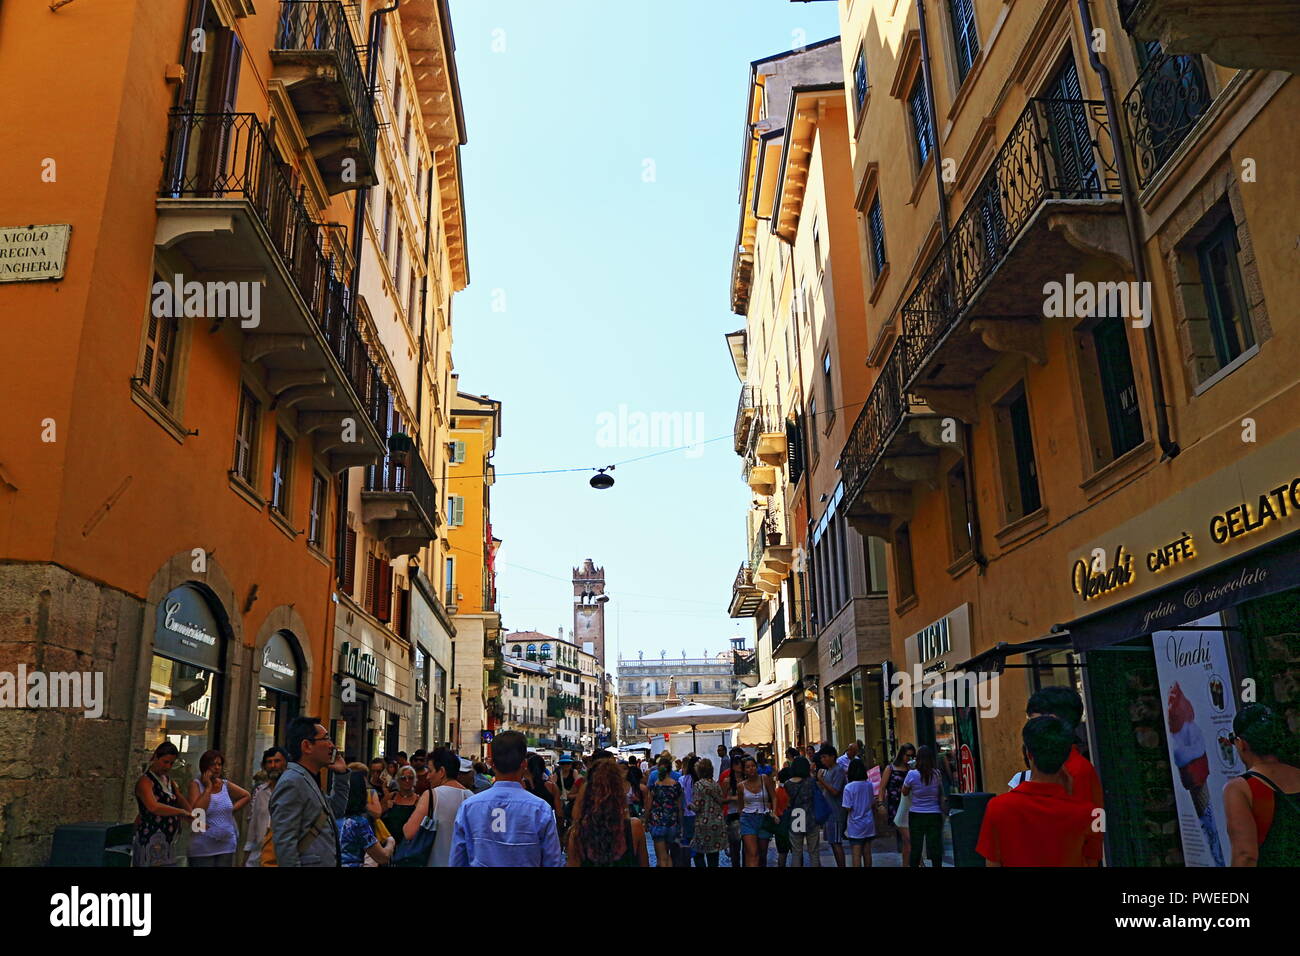 A view to Piazza delle Erbe-the central square in the old town of Verona from busy Via Cappello,Italy Stock Photo